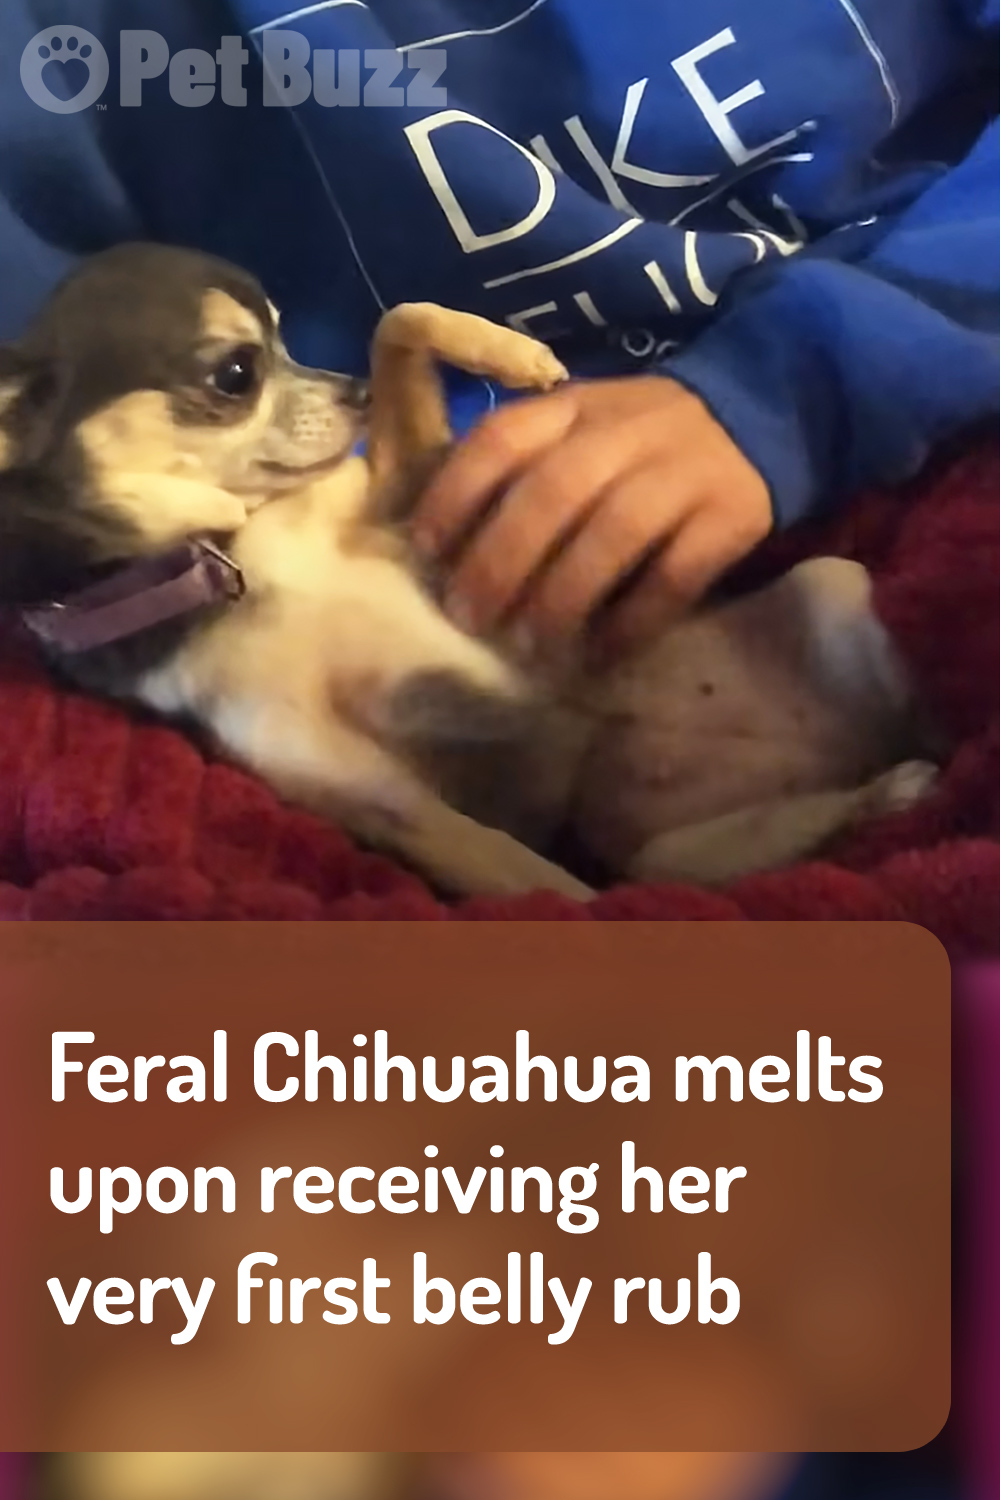 Feral Chihuahua melts upon receiving her very first belly rub